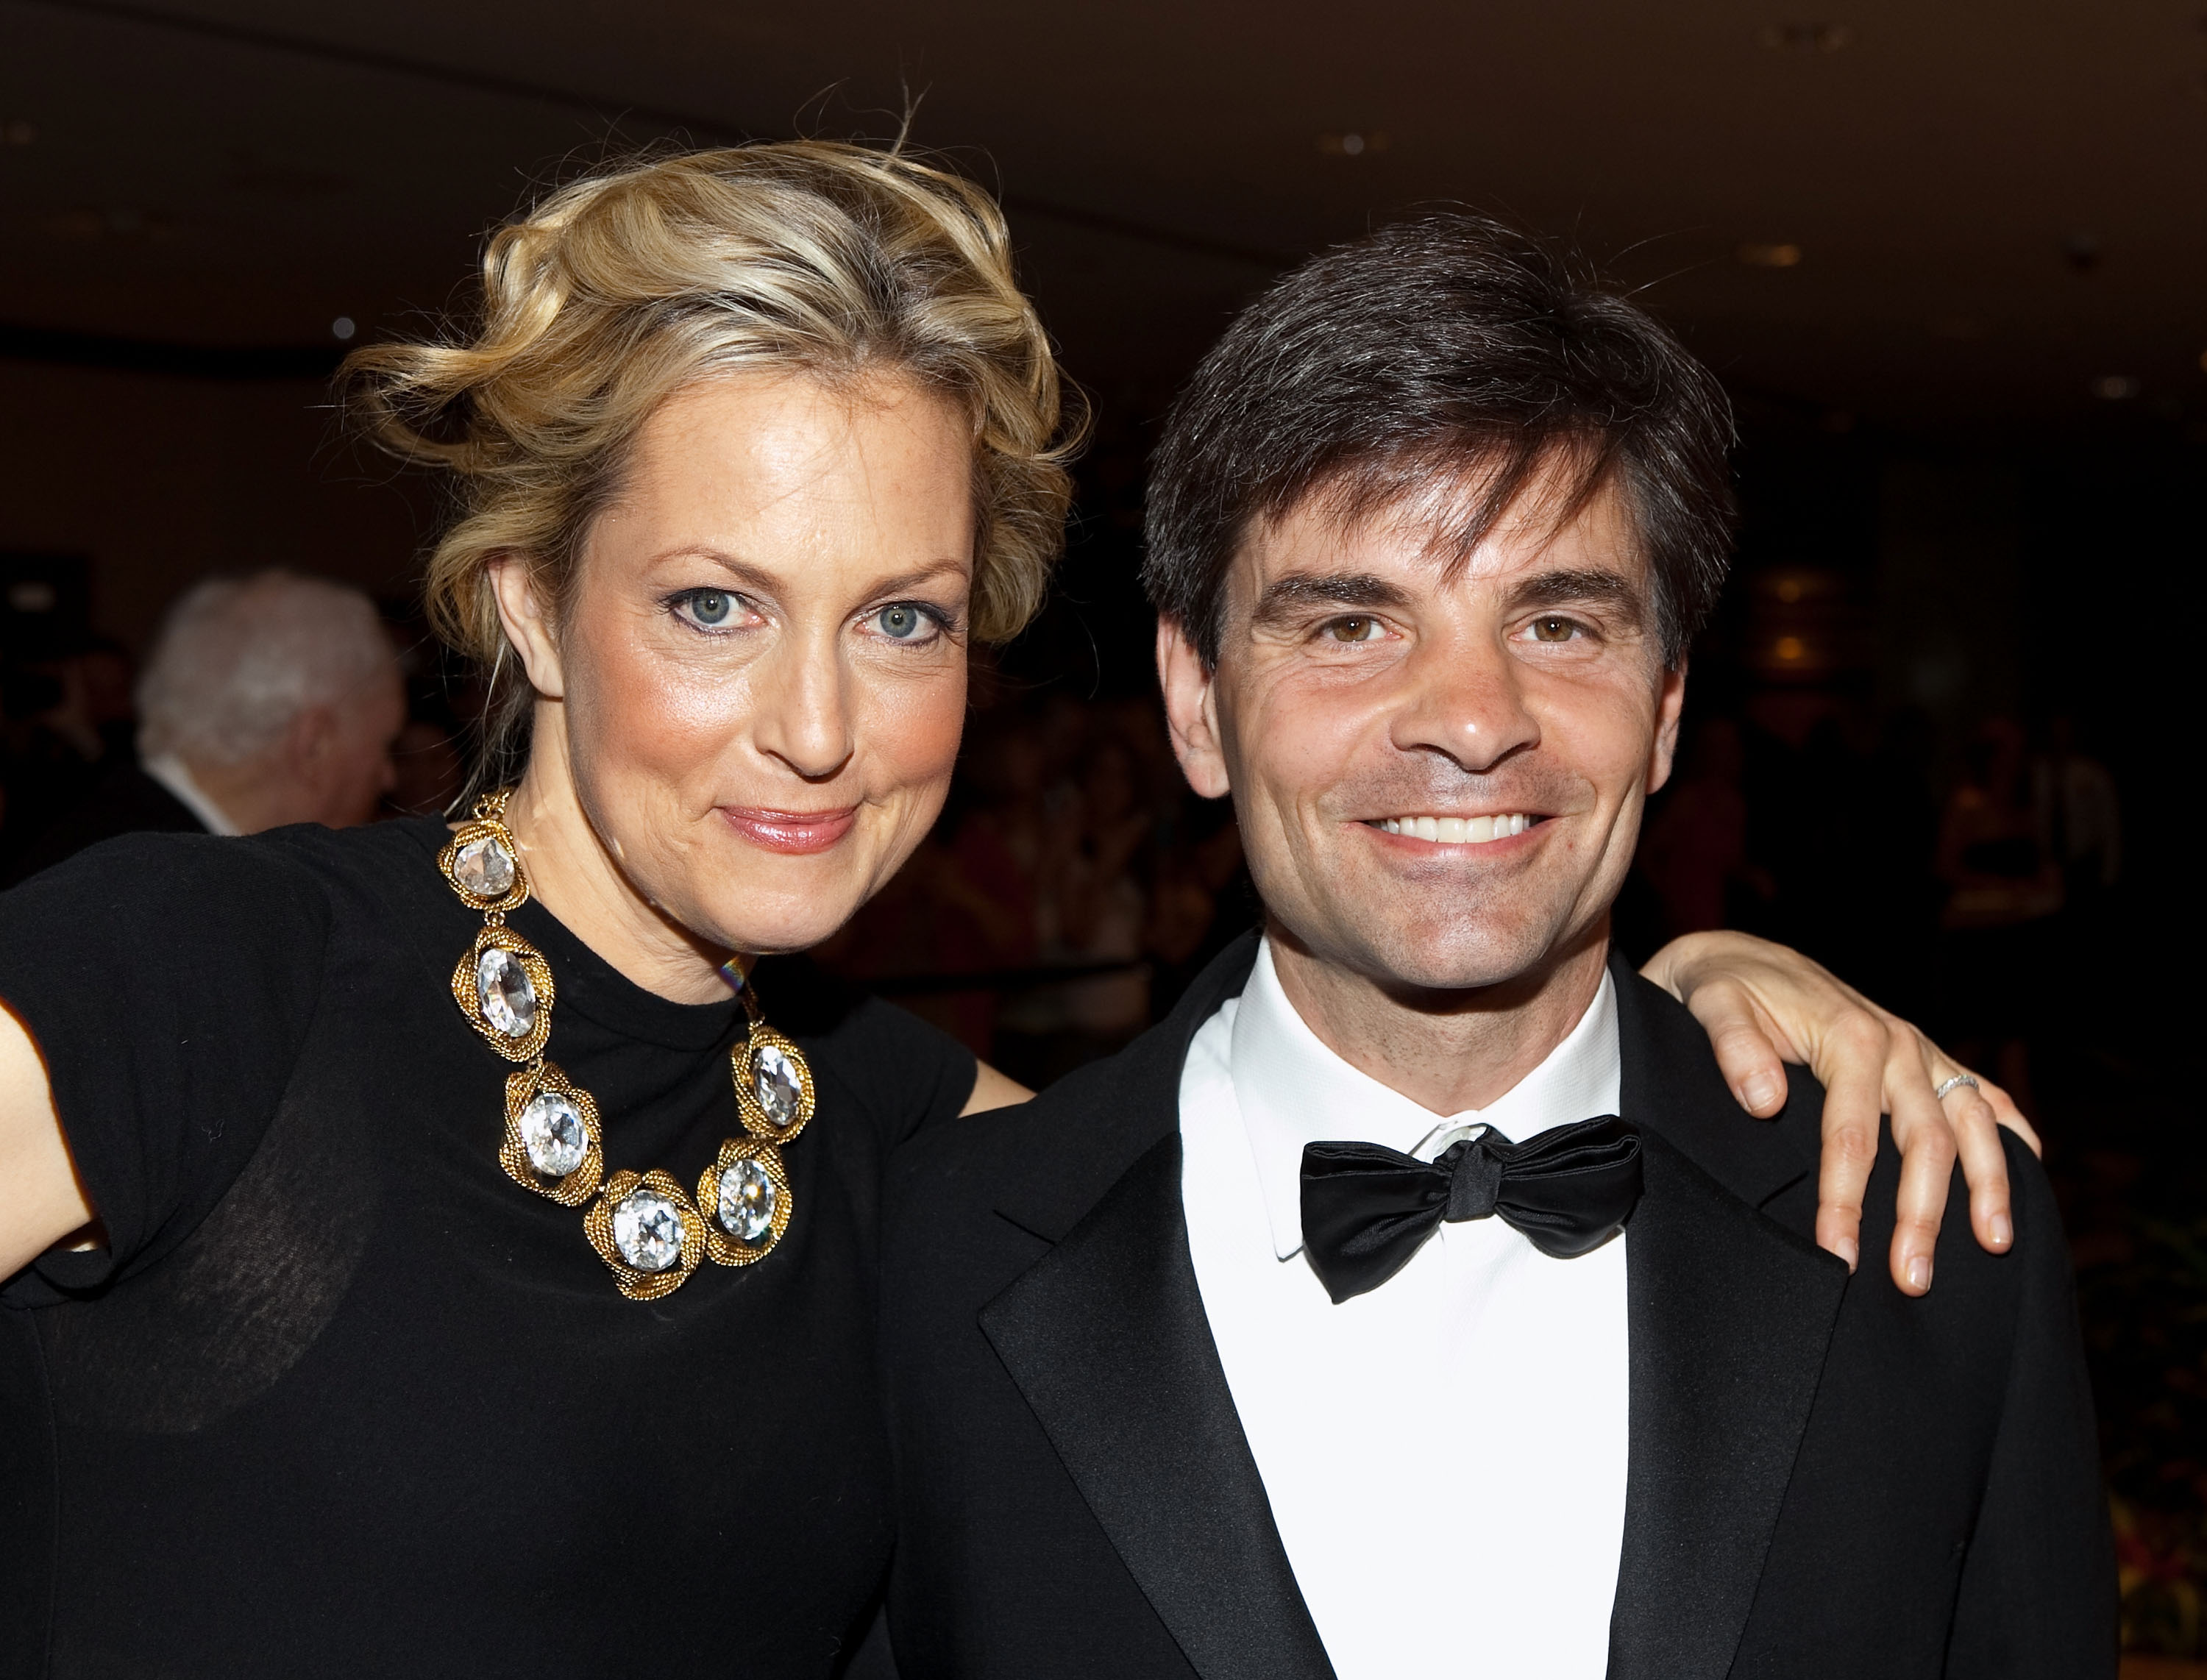 Ali Wentworth and George Stephanopoulos at the White House Correspondents' Association Dinner in Washington, DC, on May 9, 2009. | Source: Getty Images